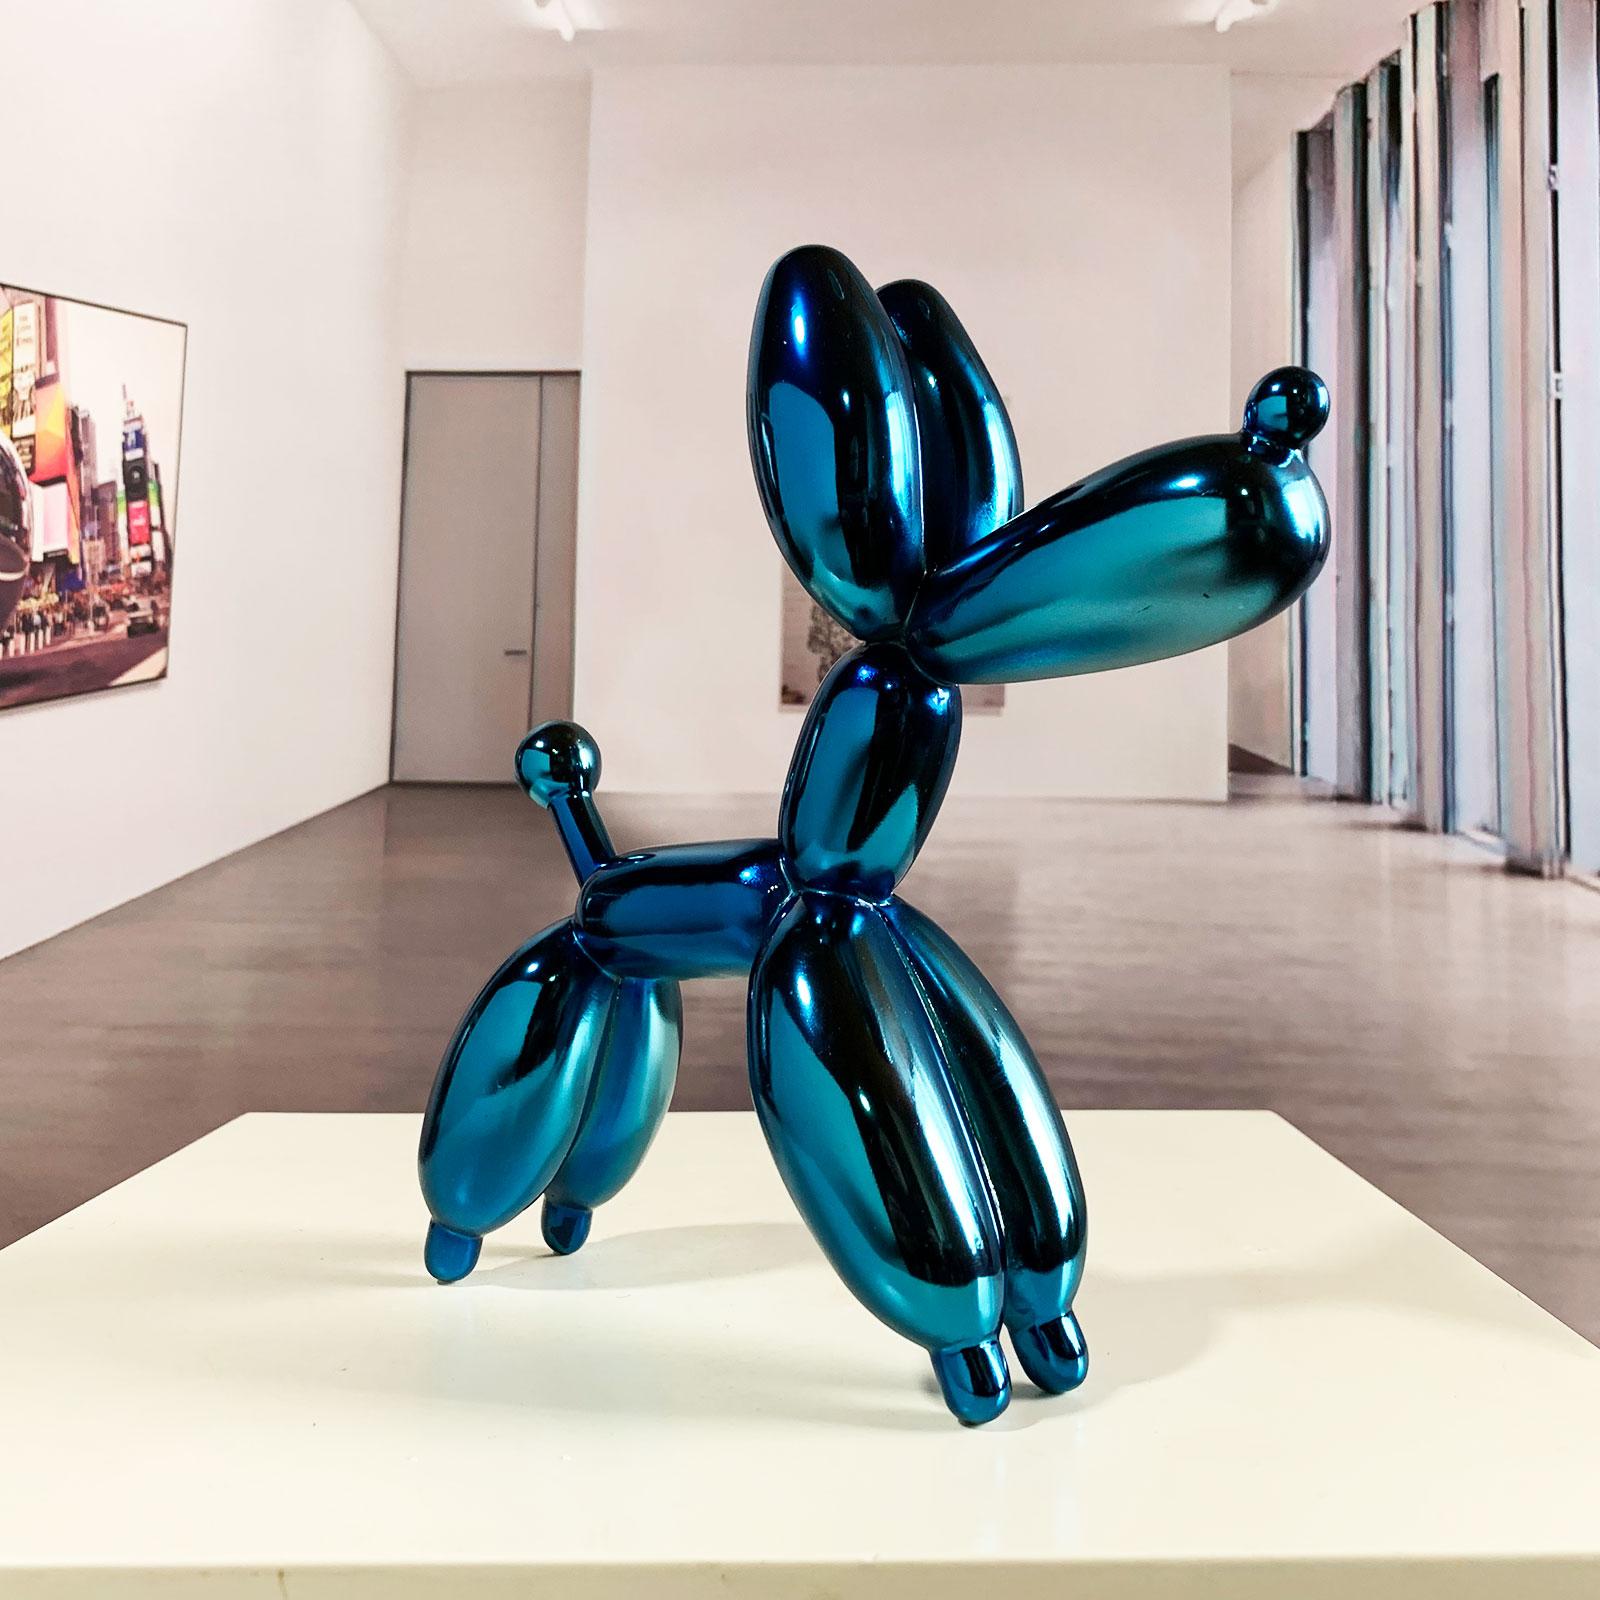 Pop Art Sculpture "Blue Dog Balloon 21" by Miguel Gu�ía.
The sculpture is made of a layer of nickel on cold smelting of copper with the base of graphite or marble dust.
Limited edition of 299 works.
Although the required time to deliver a shipment is